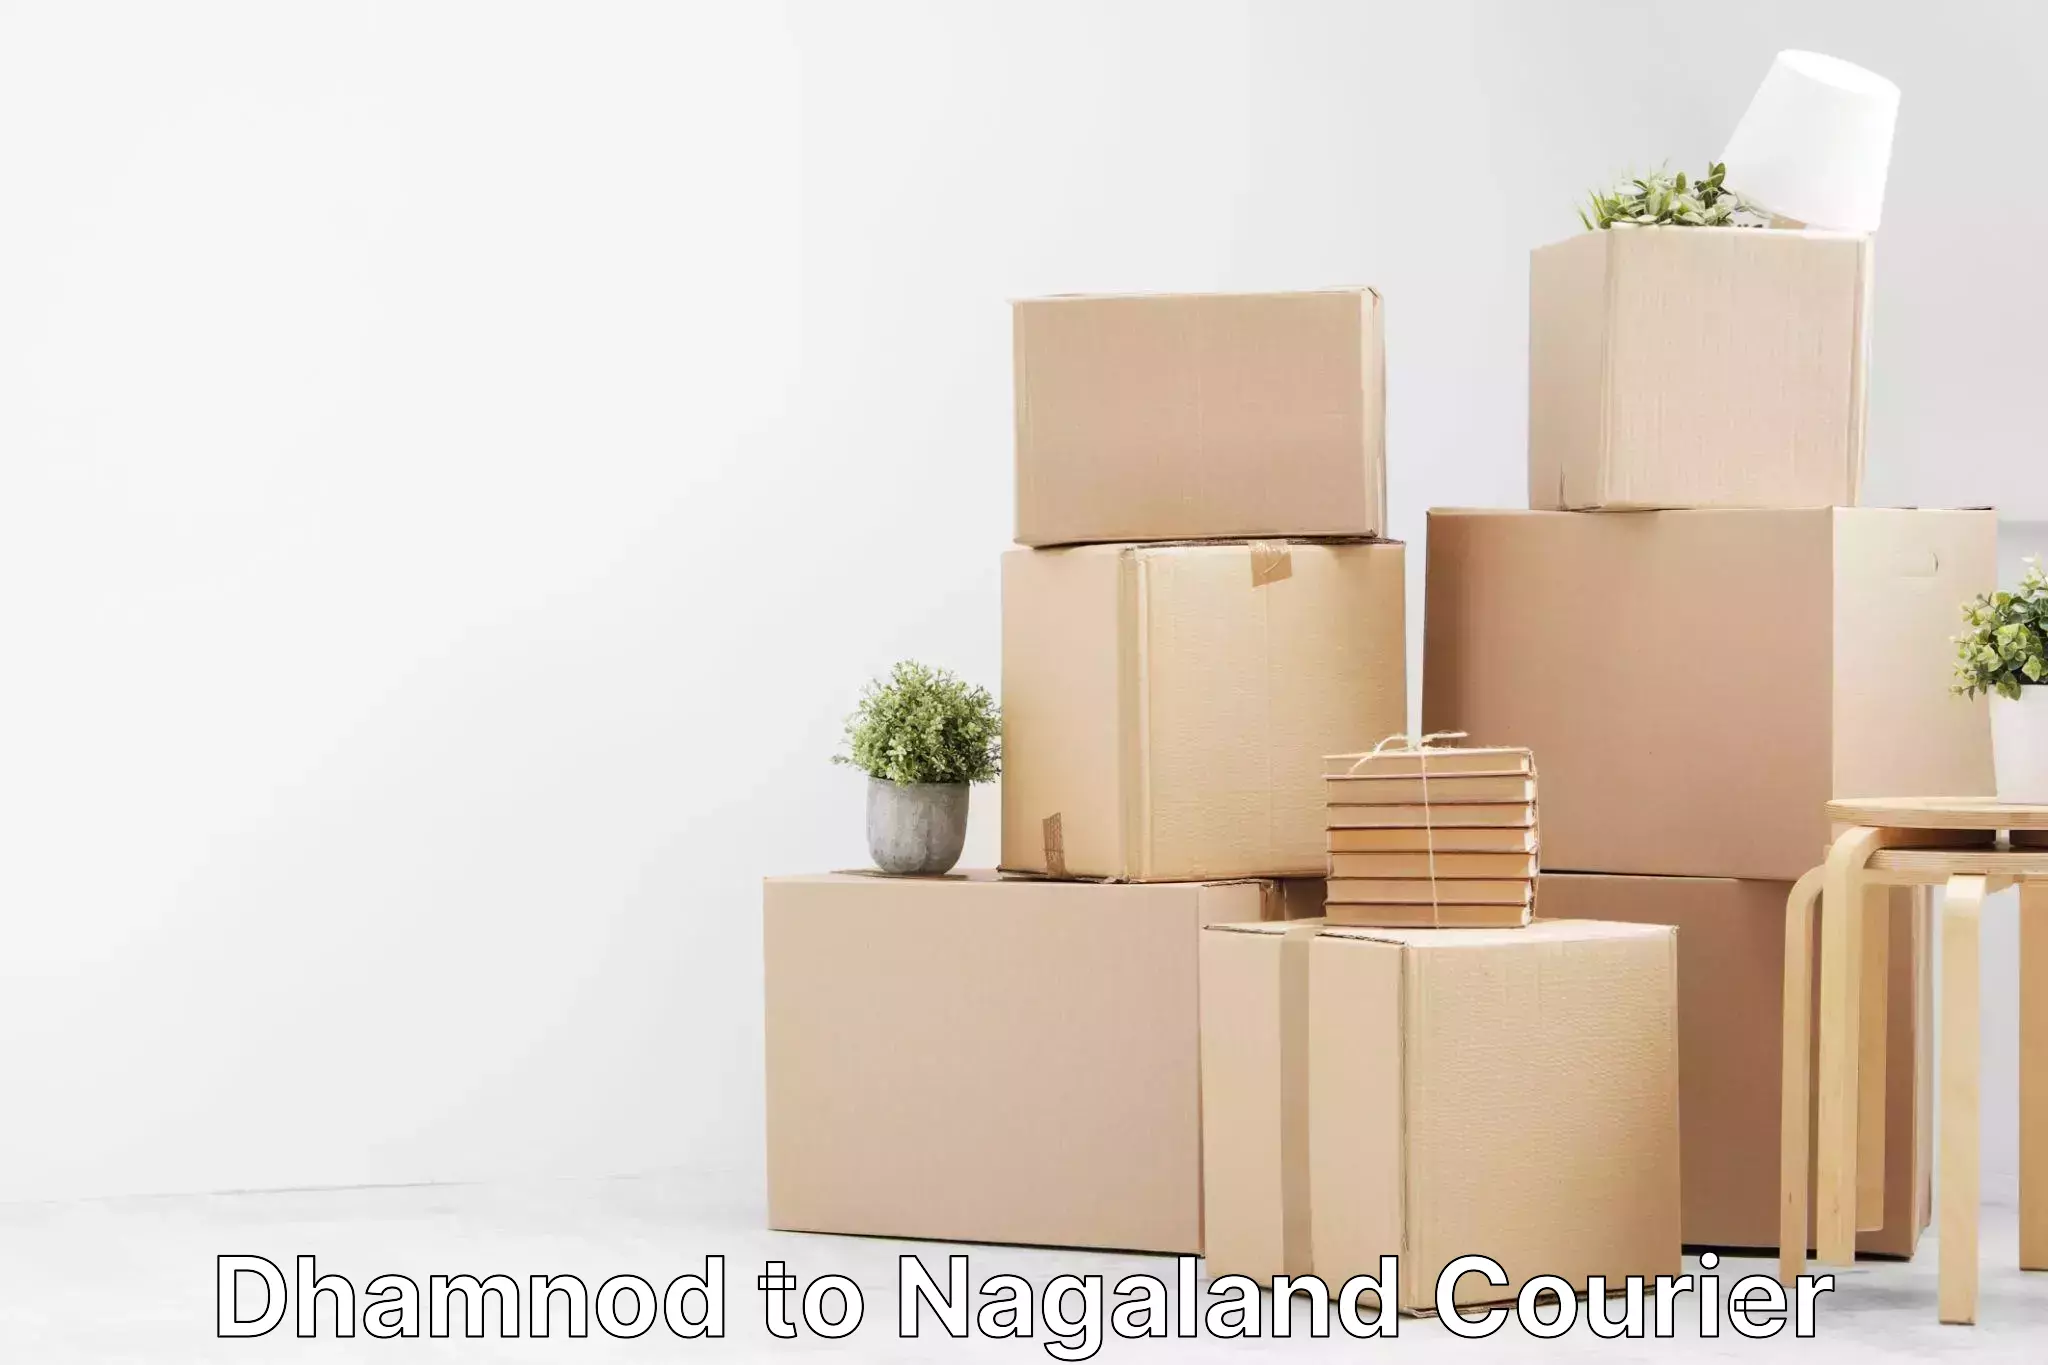 Optimized delivery routes in Dhamnod to Nagaland